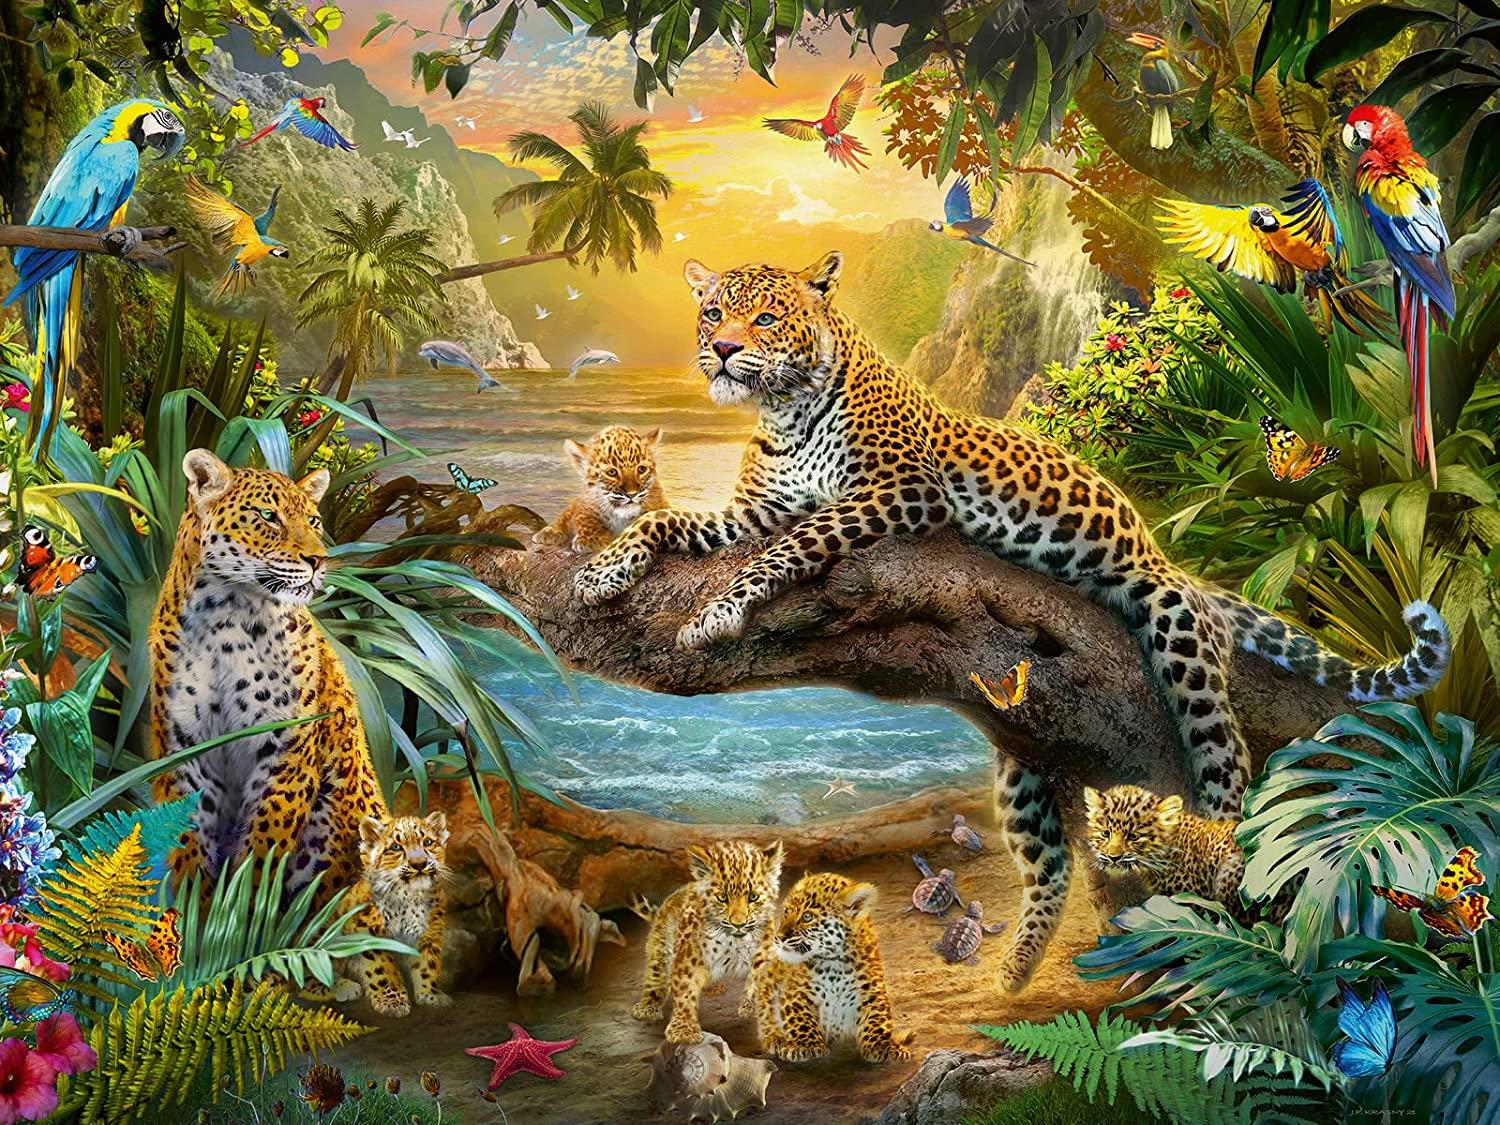 Ravensburger Leopards in the Jungle Jigsaw Puzzles (1500 Pieces)